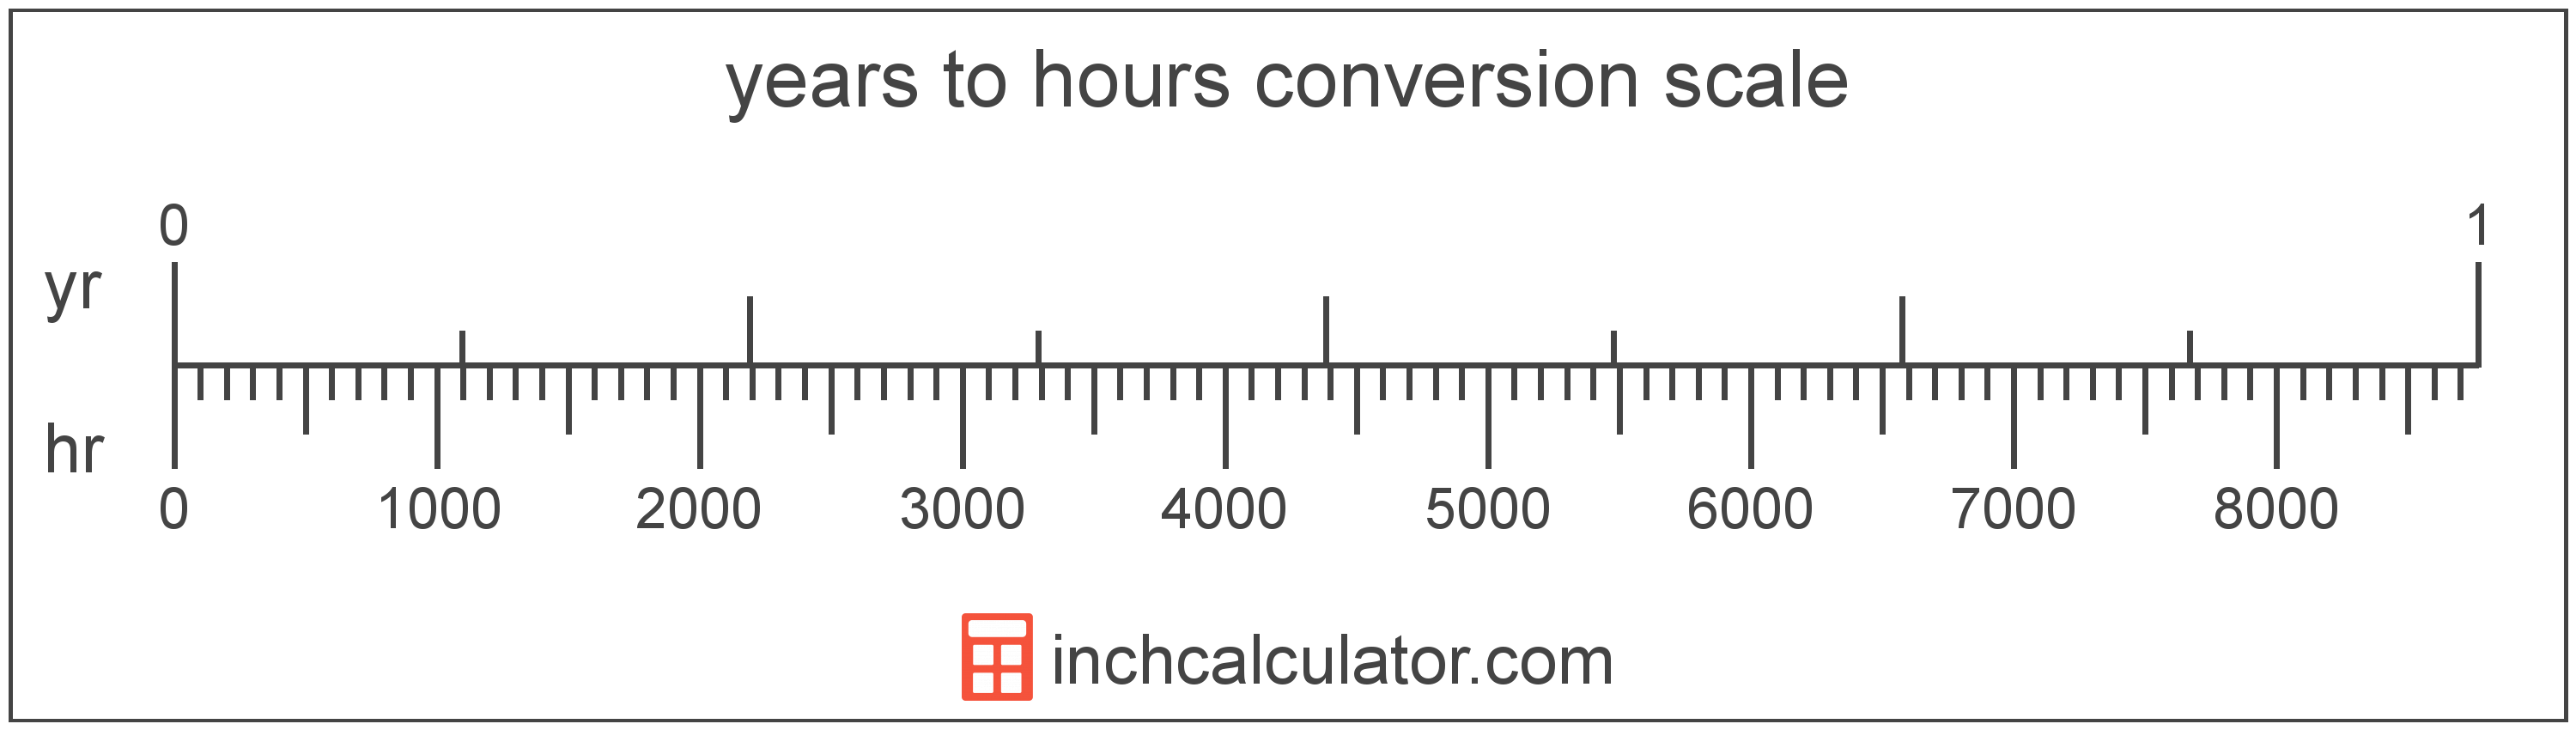 conversion scale showing hours and equivalent years time values